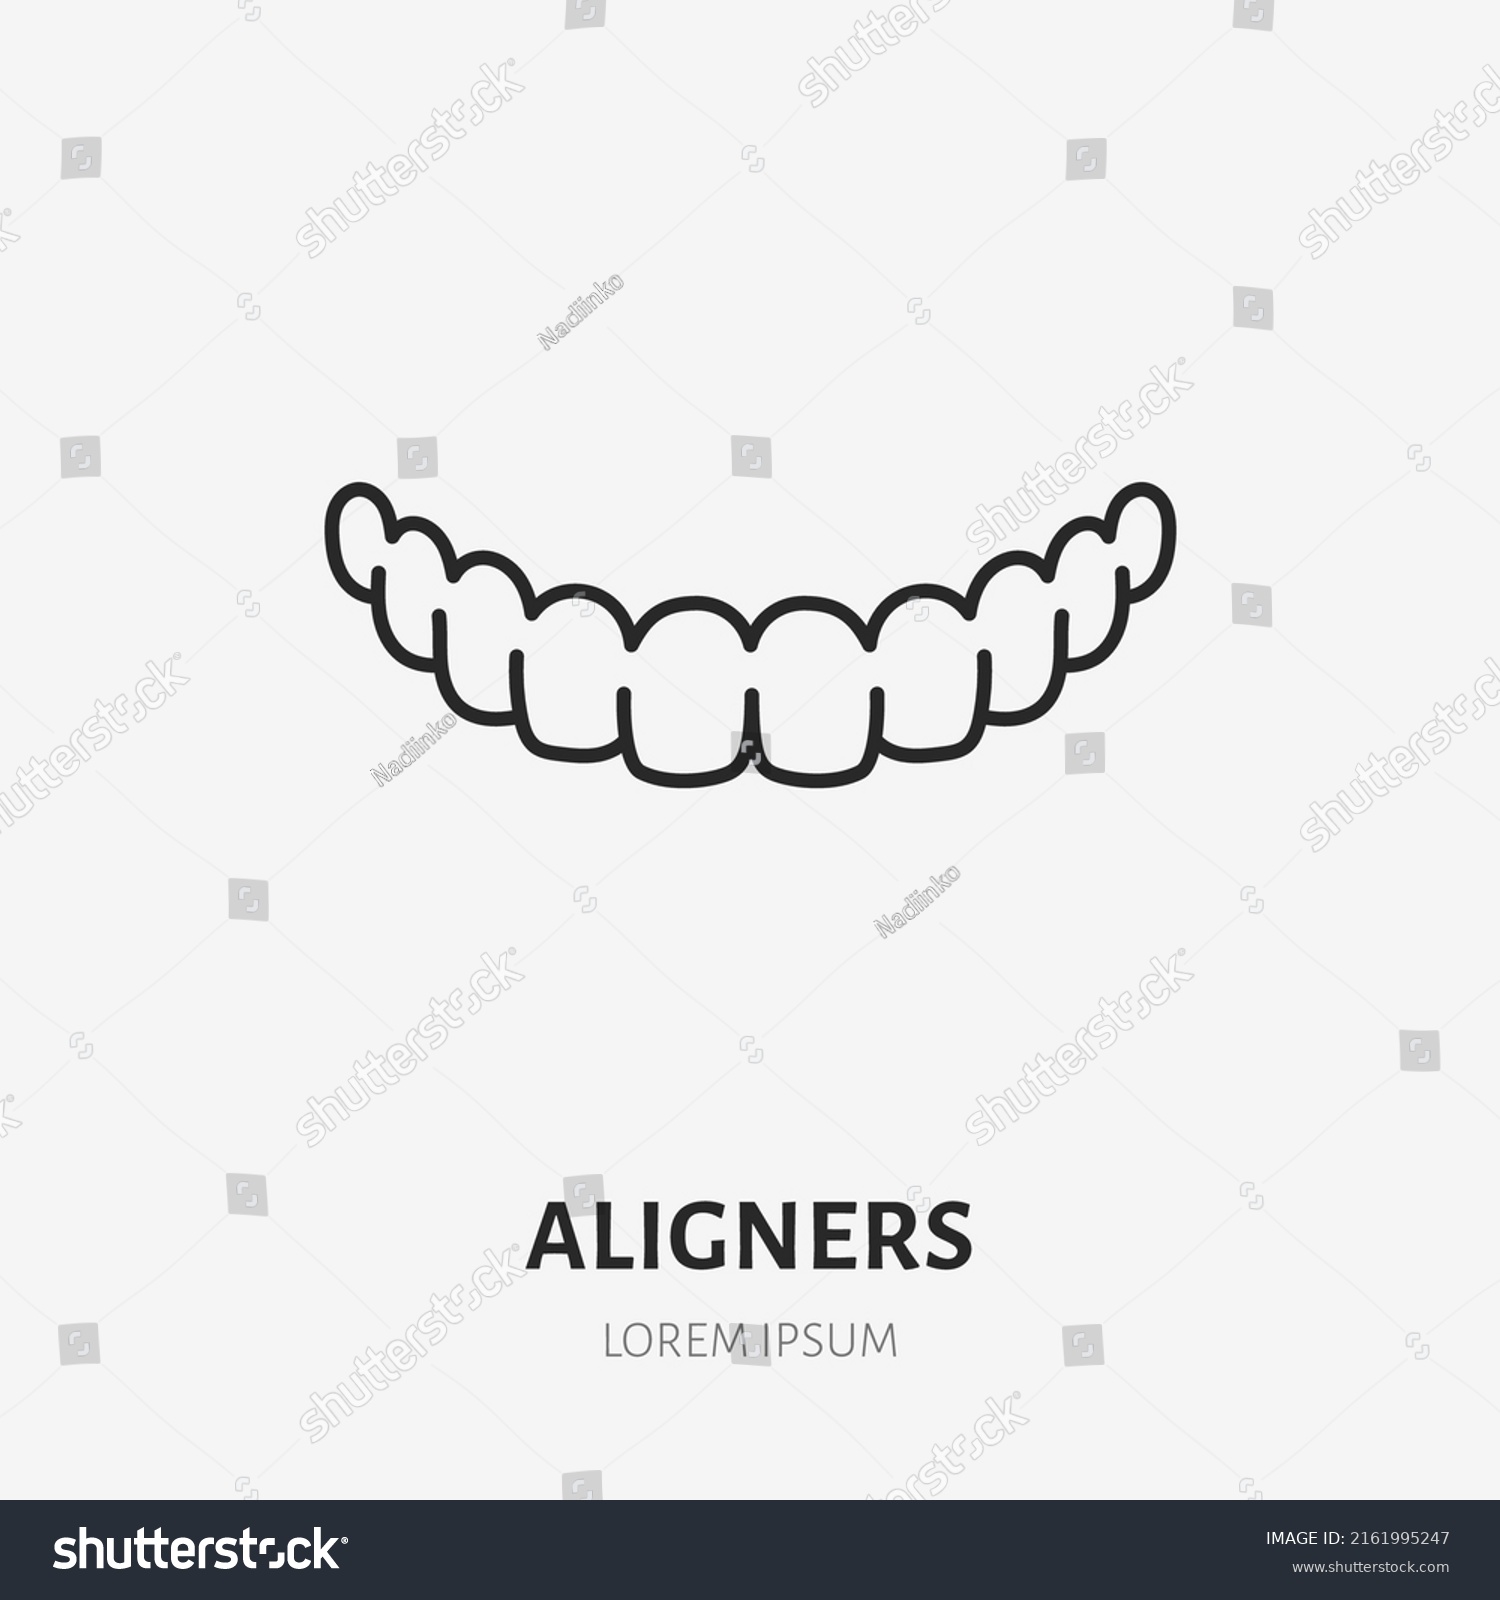 Aligner doodle line icon. Vector thin outline illustration of human teeth treatment. Black color linear sign for orthodontic dentistry #2161995247